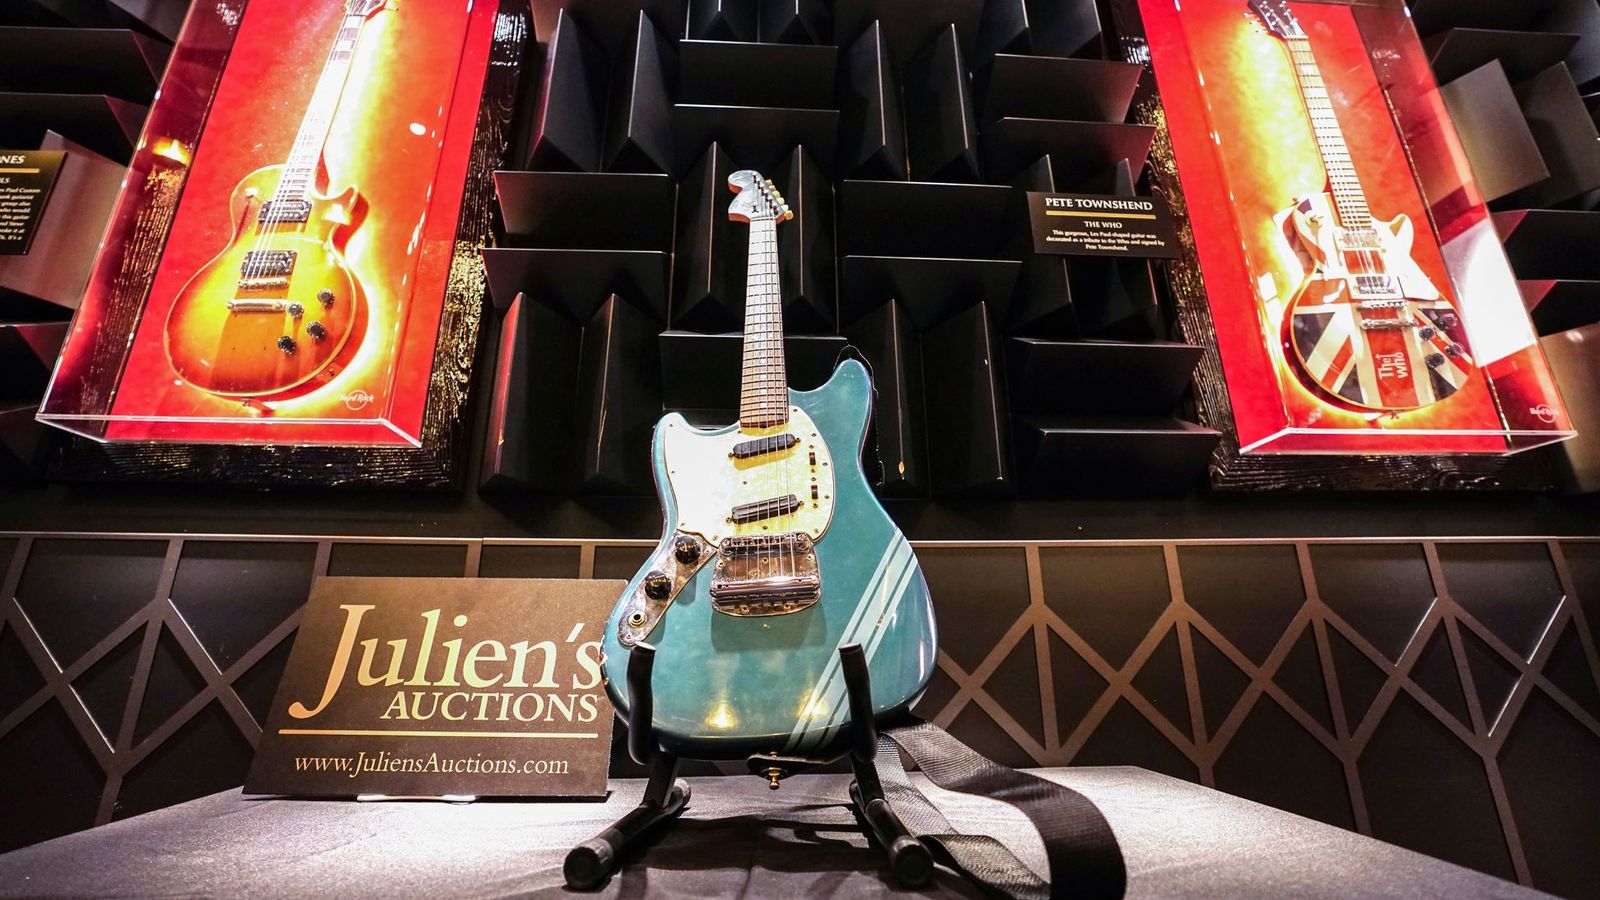 Kurt Cobain’s Smells Like Teen Spirit electric guitar sold for £3.5m at auction